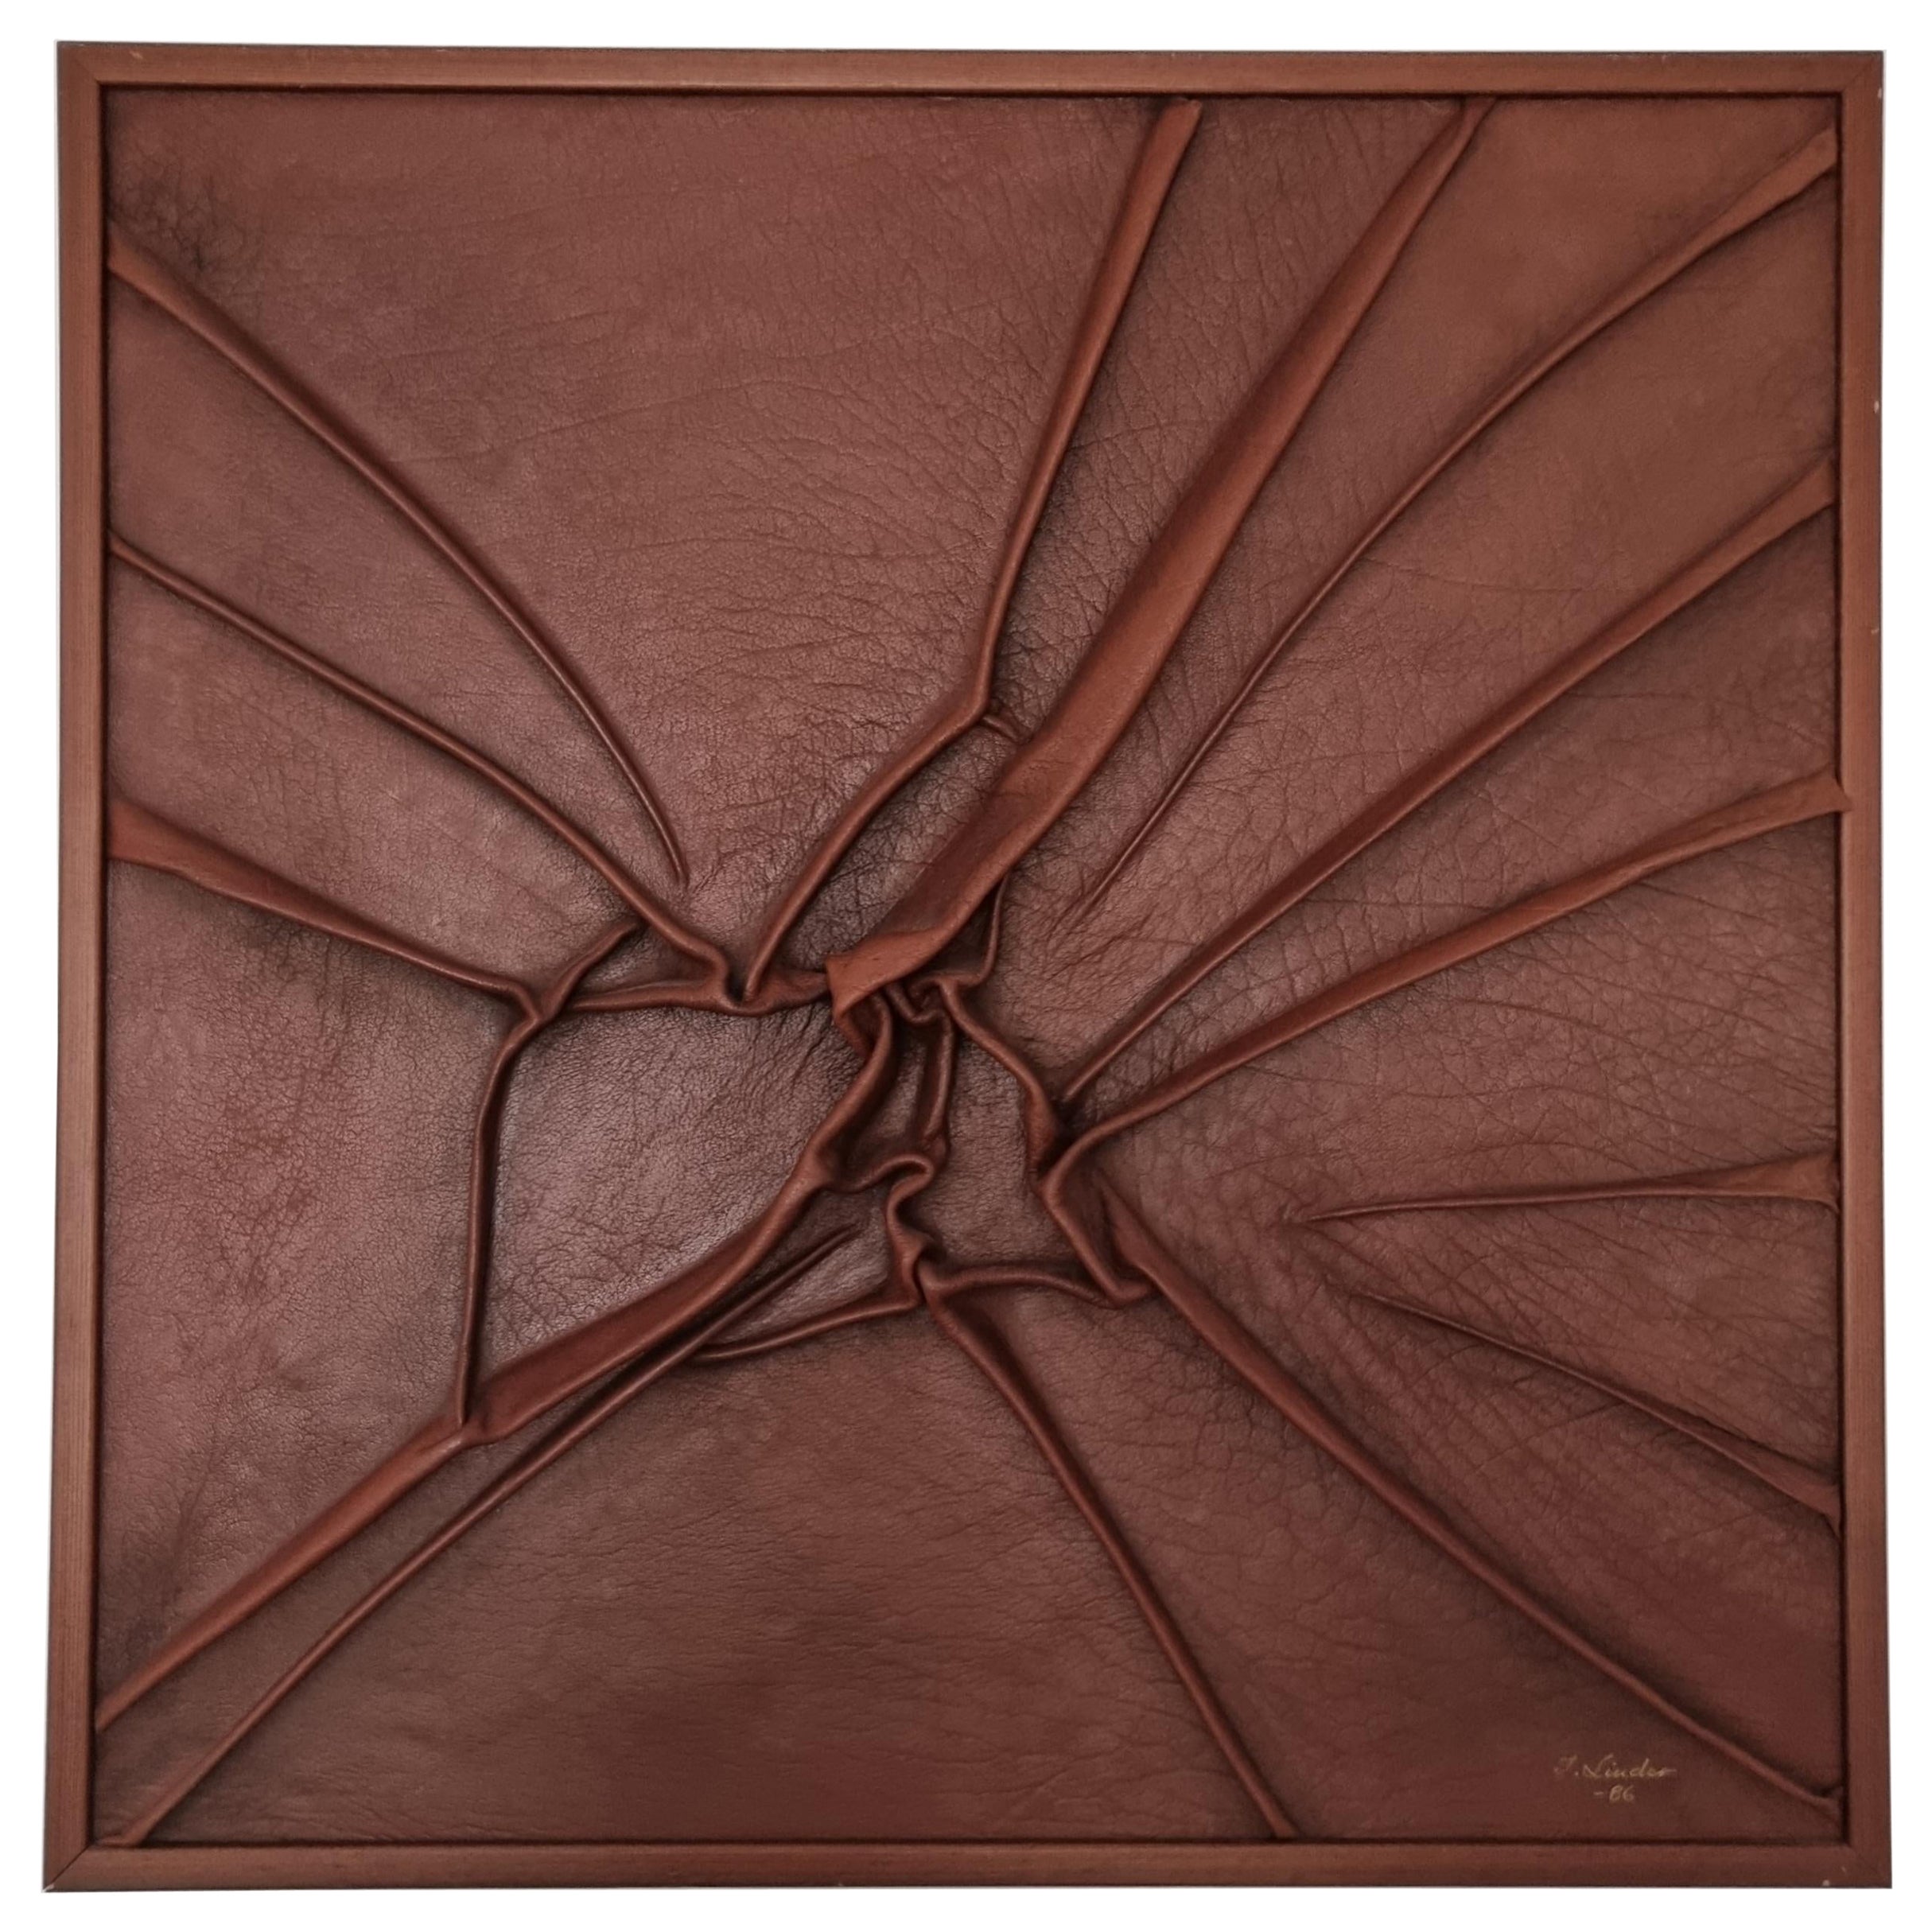 Ing-Marie Linder, wall art / relief in leather, Post-Modern Sweden